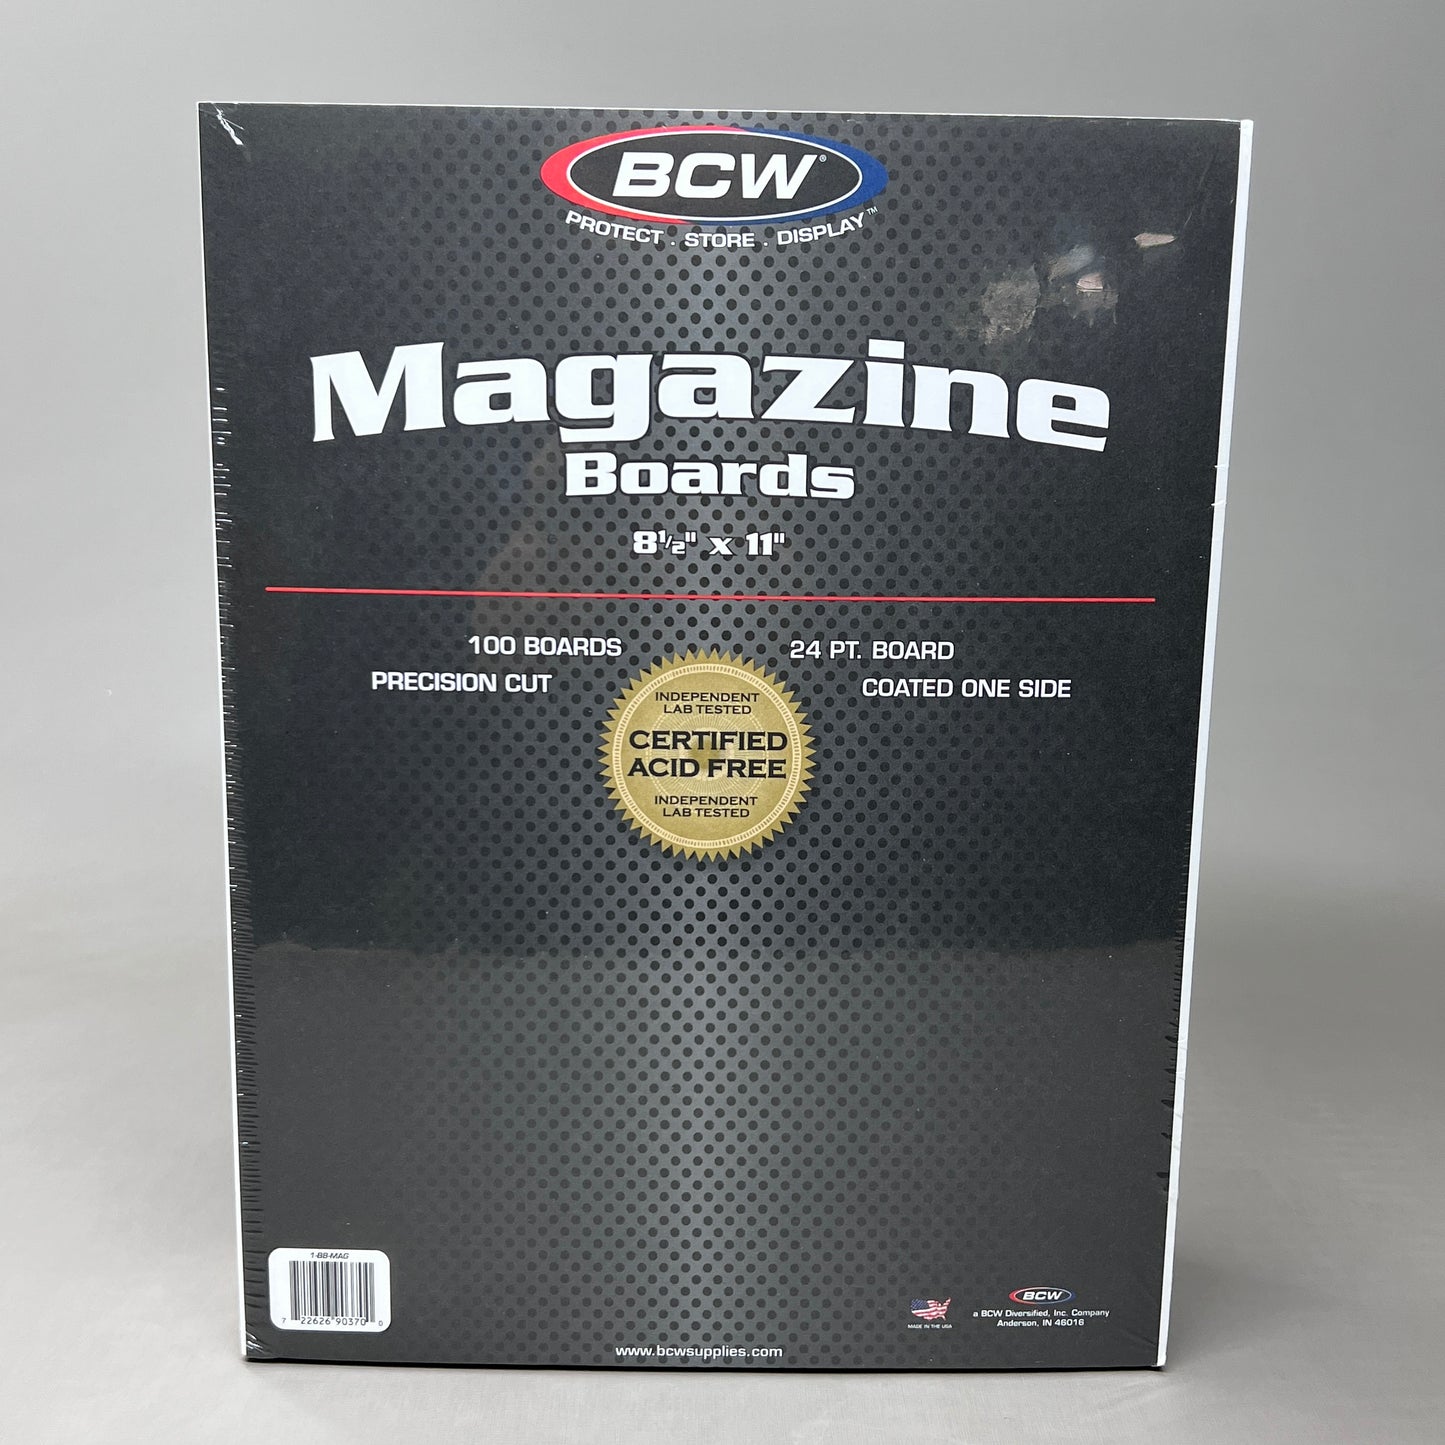 BCW Magazine Boards 100-PACK 8 1/2 - 11 Precision Cut 1-BB-MAG (New)